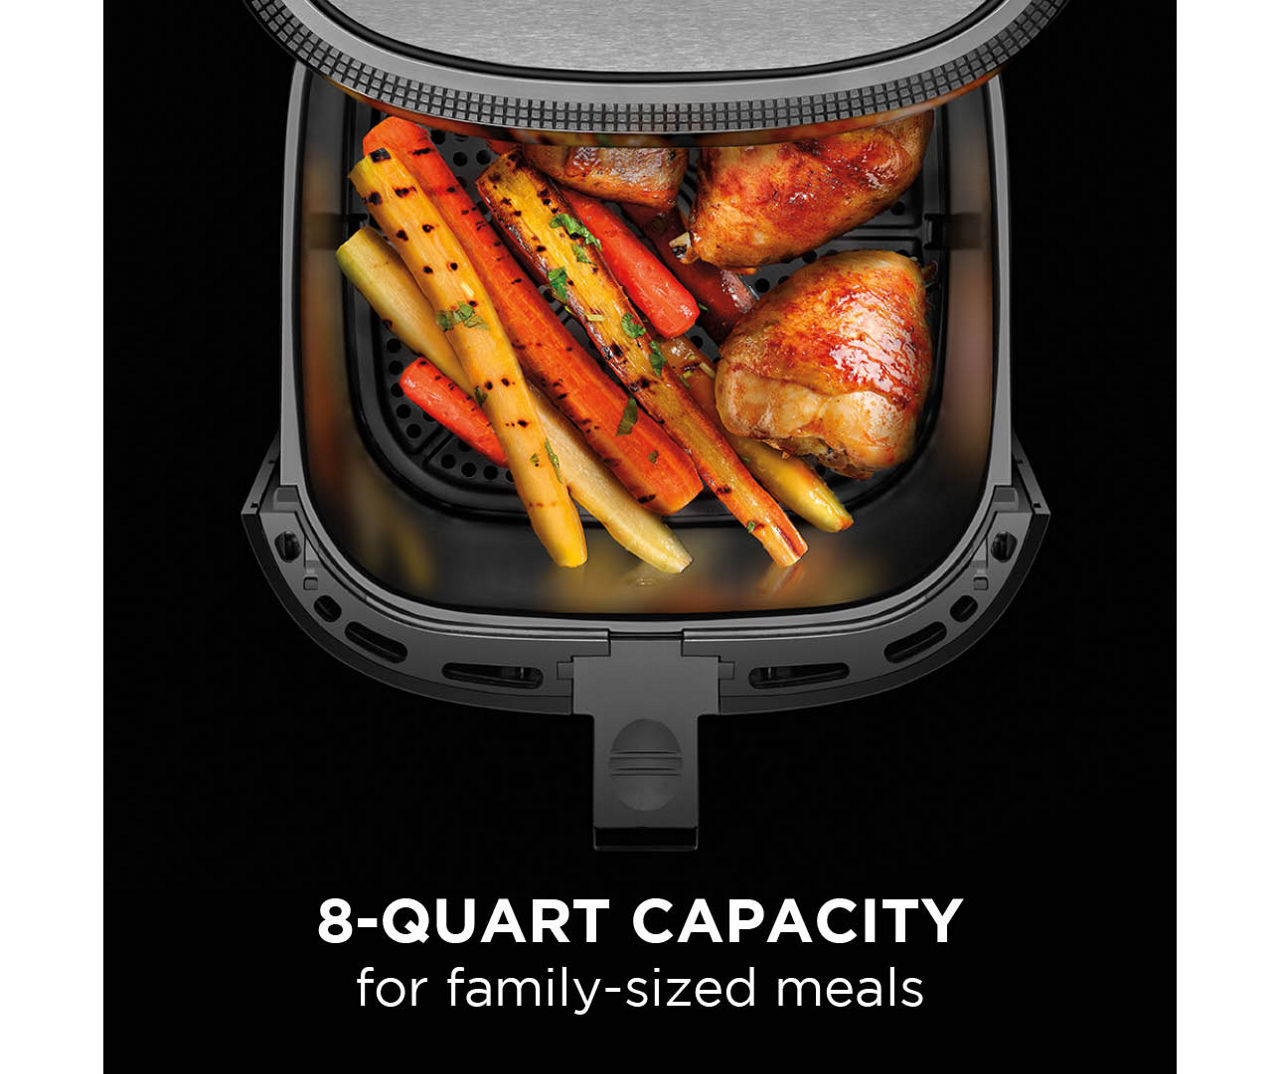 Air Fryer, 8 Quart Family Size, One- Digital for Healthy Cooking